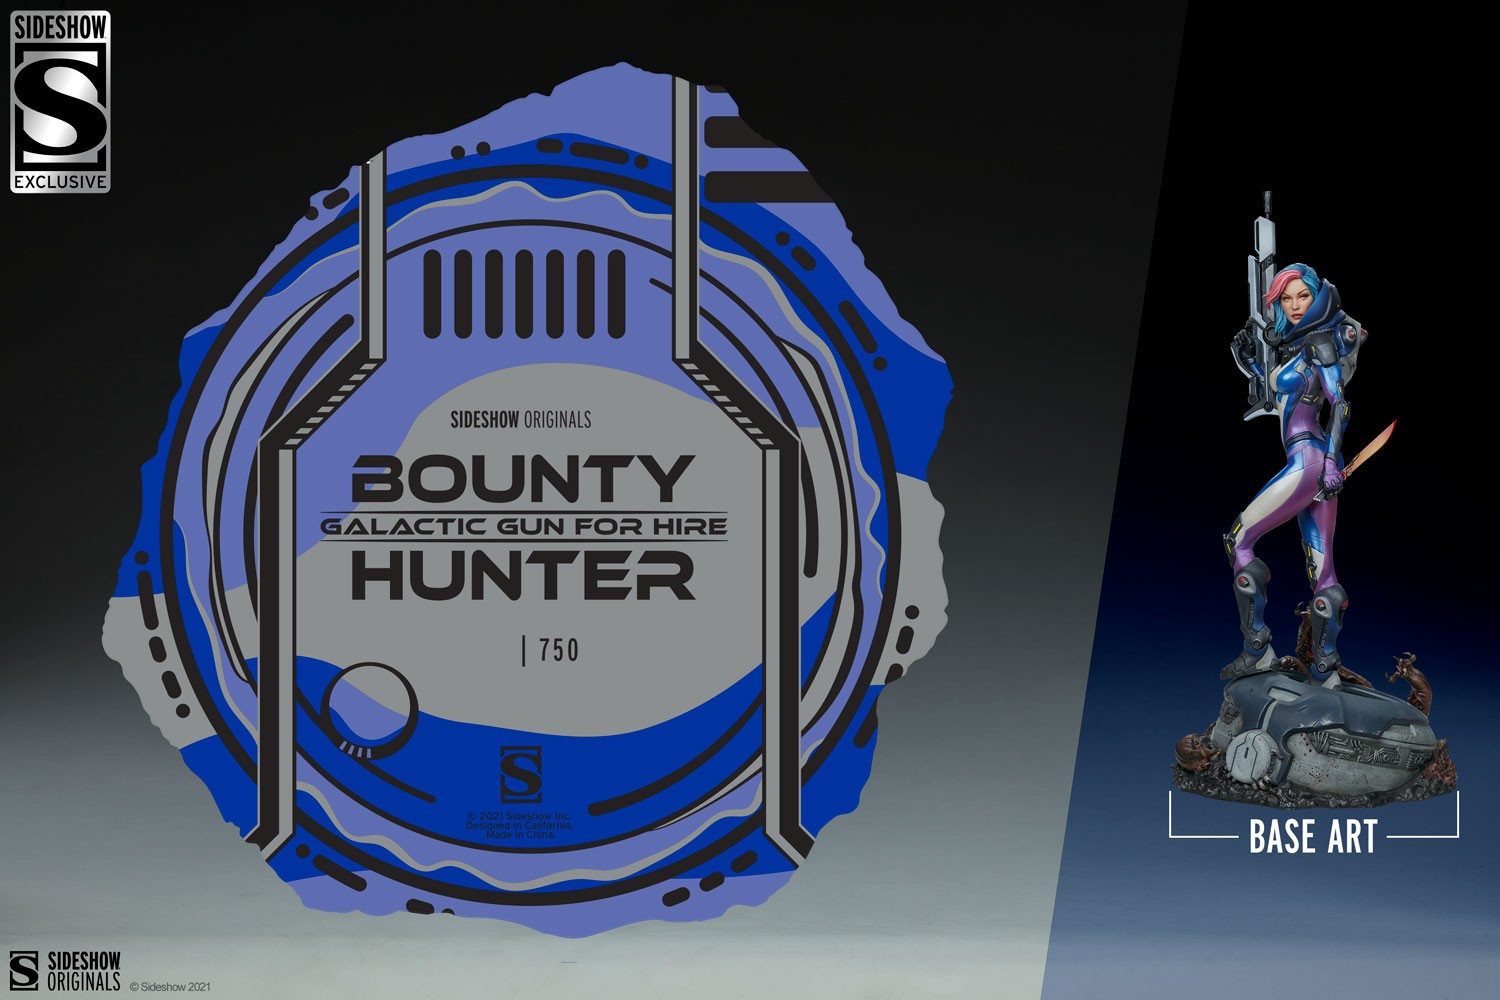 Bounty Hunter: Galactic Gun For Hire Exclusive Edition View 5